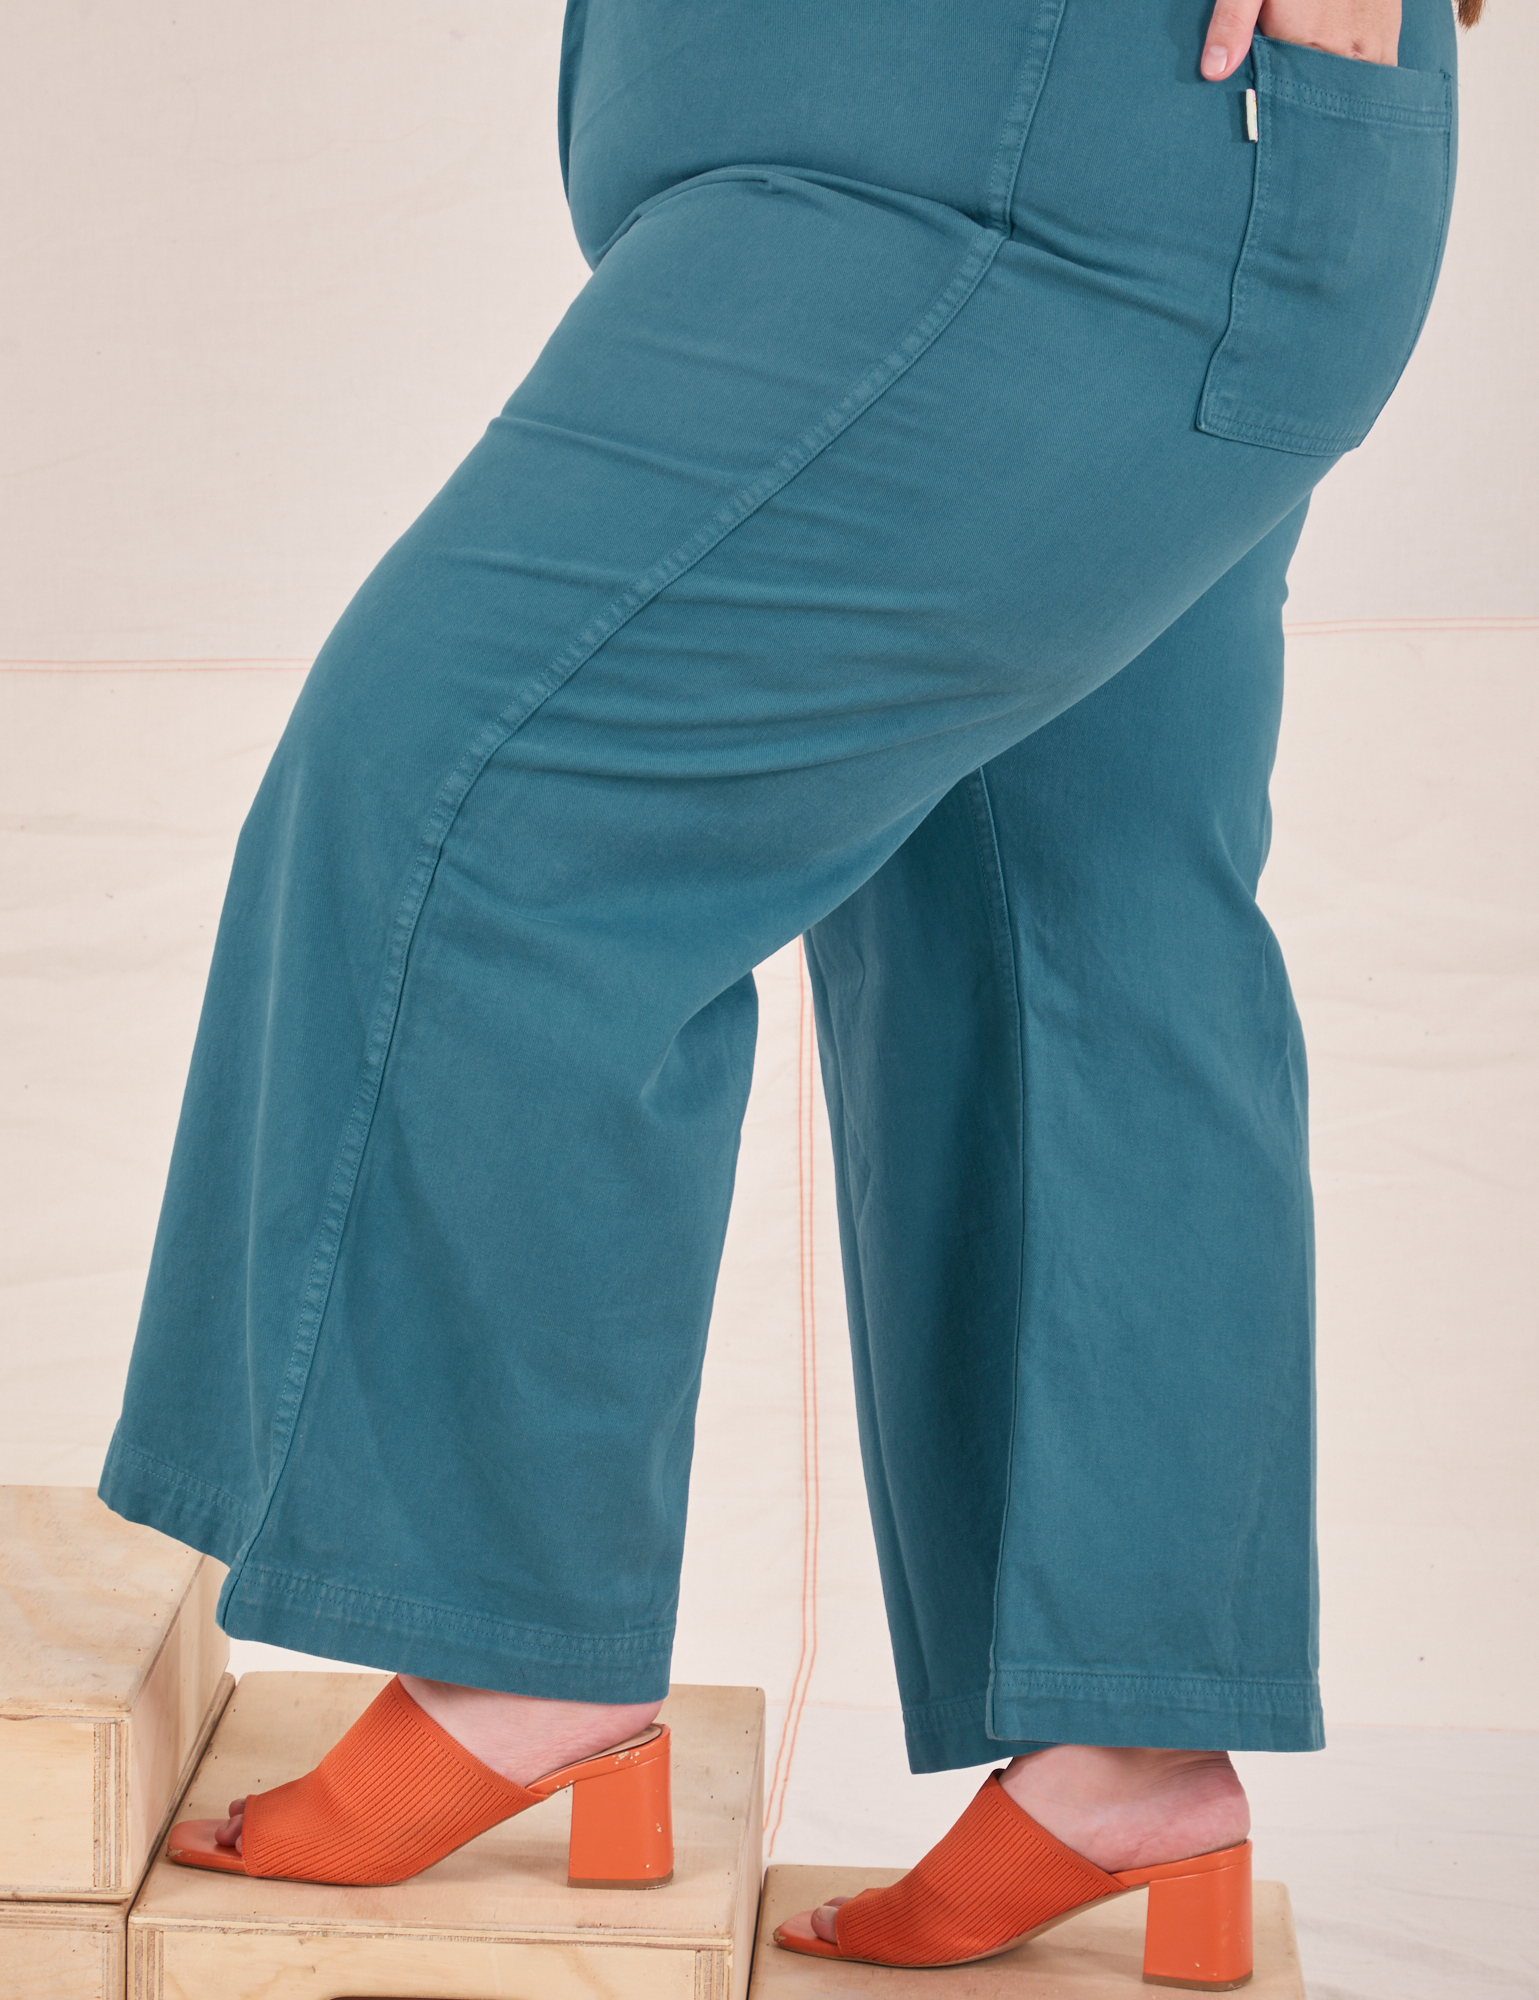 Bell Bottoms in Marine Blue pant leg side view close up on Marielena